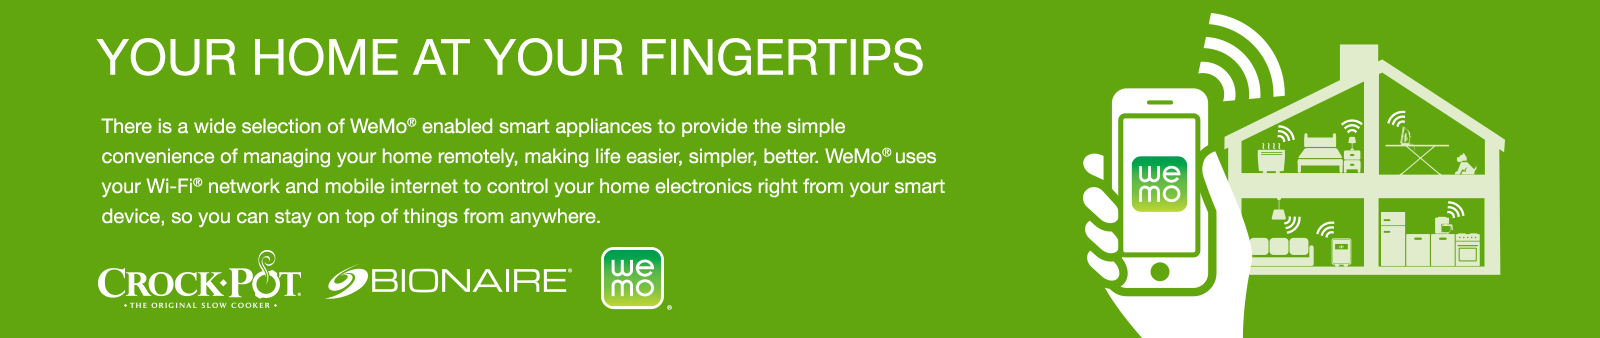 Your home at your fingertips